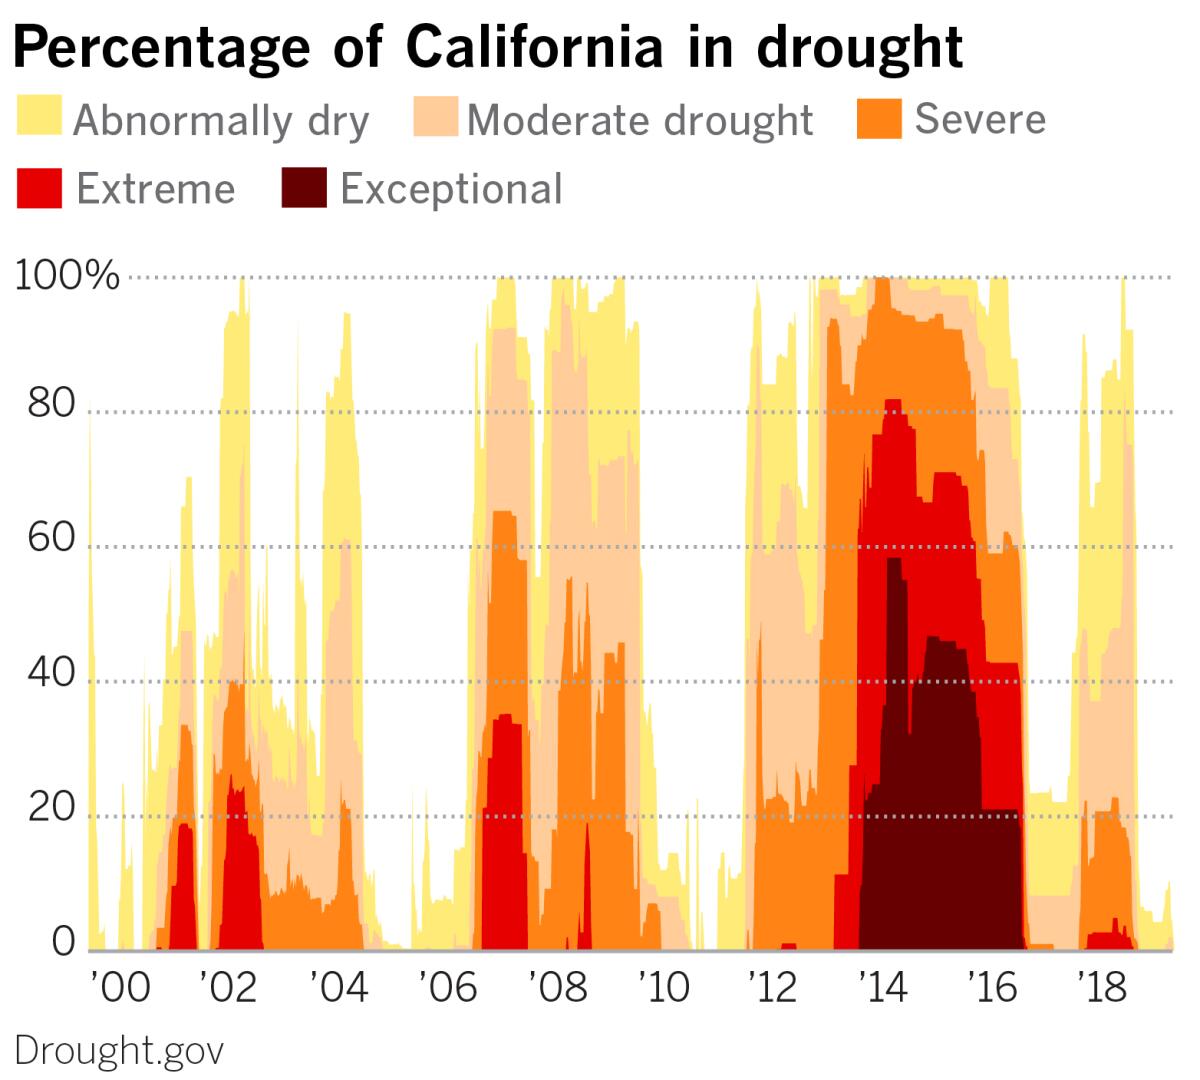 In 2001, Bill Patzert predicted a 20-year drought, which has turned out to be an accurate forecast.